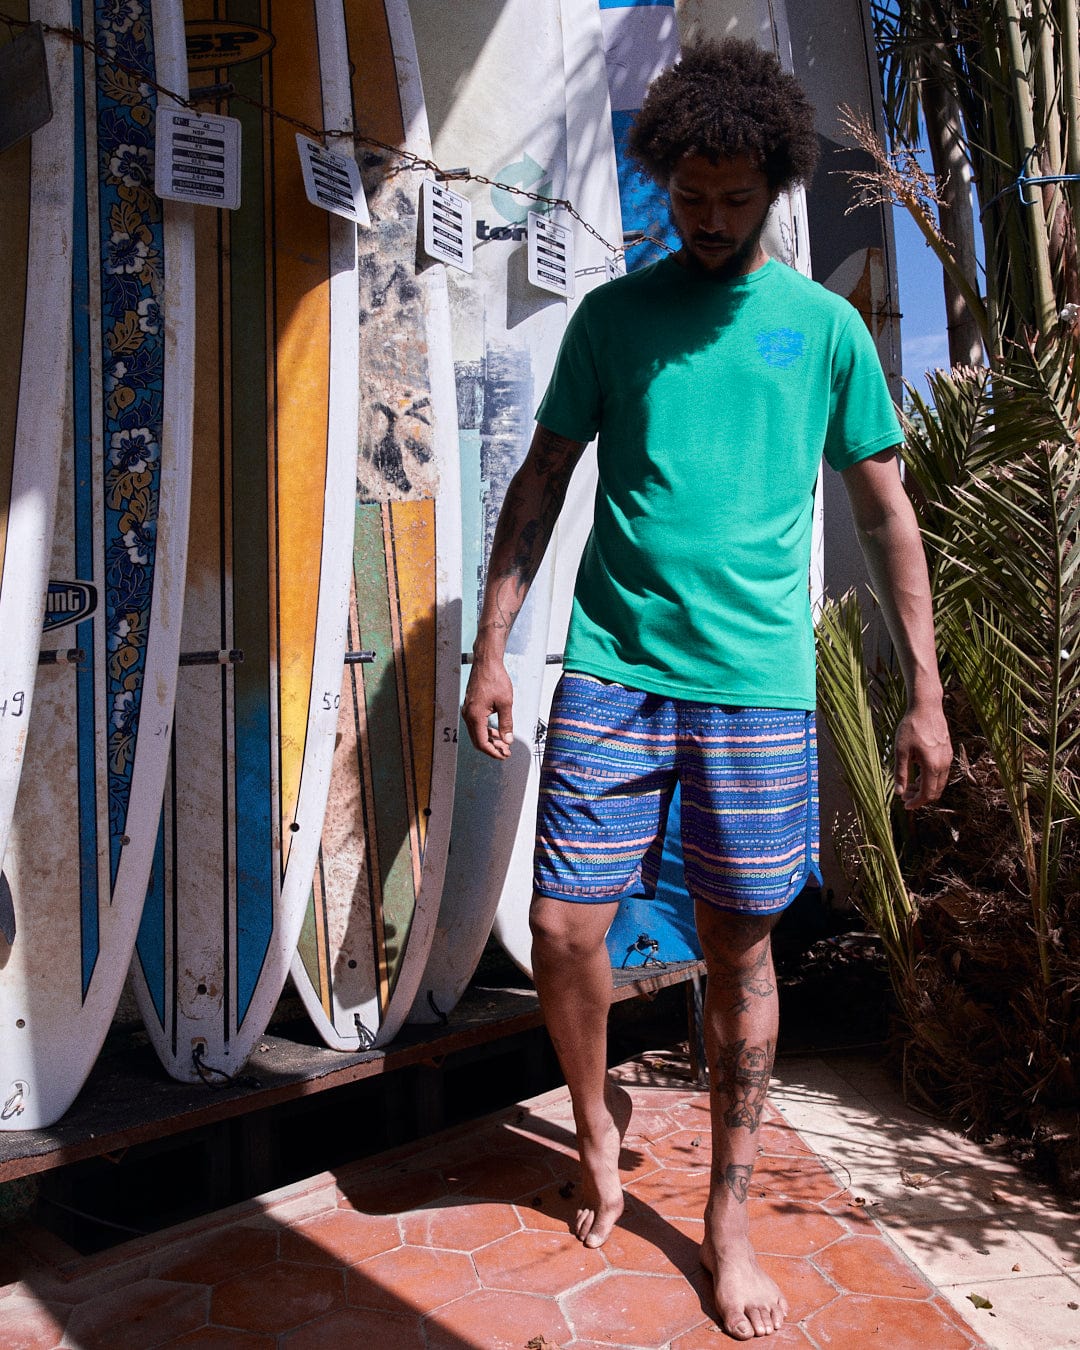 Man in green t-shirt and blue Silas boardshorts made of Repreve recycled material, standing next to a rack of surfboards under bright sunlight.